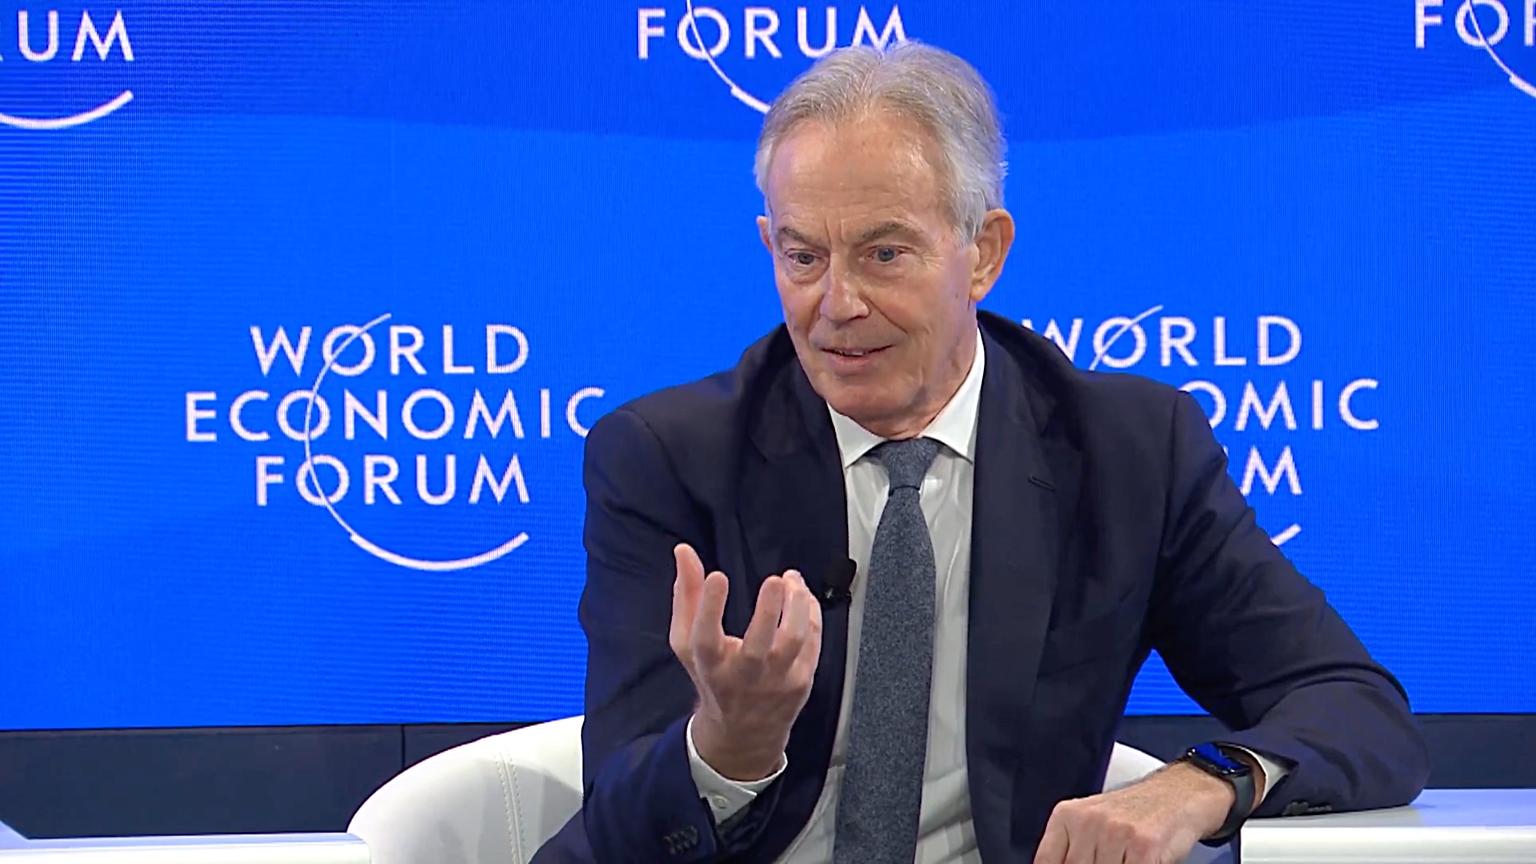 Tony Blair calls for WEF and WTO to introduce “digital infrastructure” that monitors vaccination status